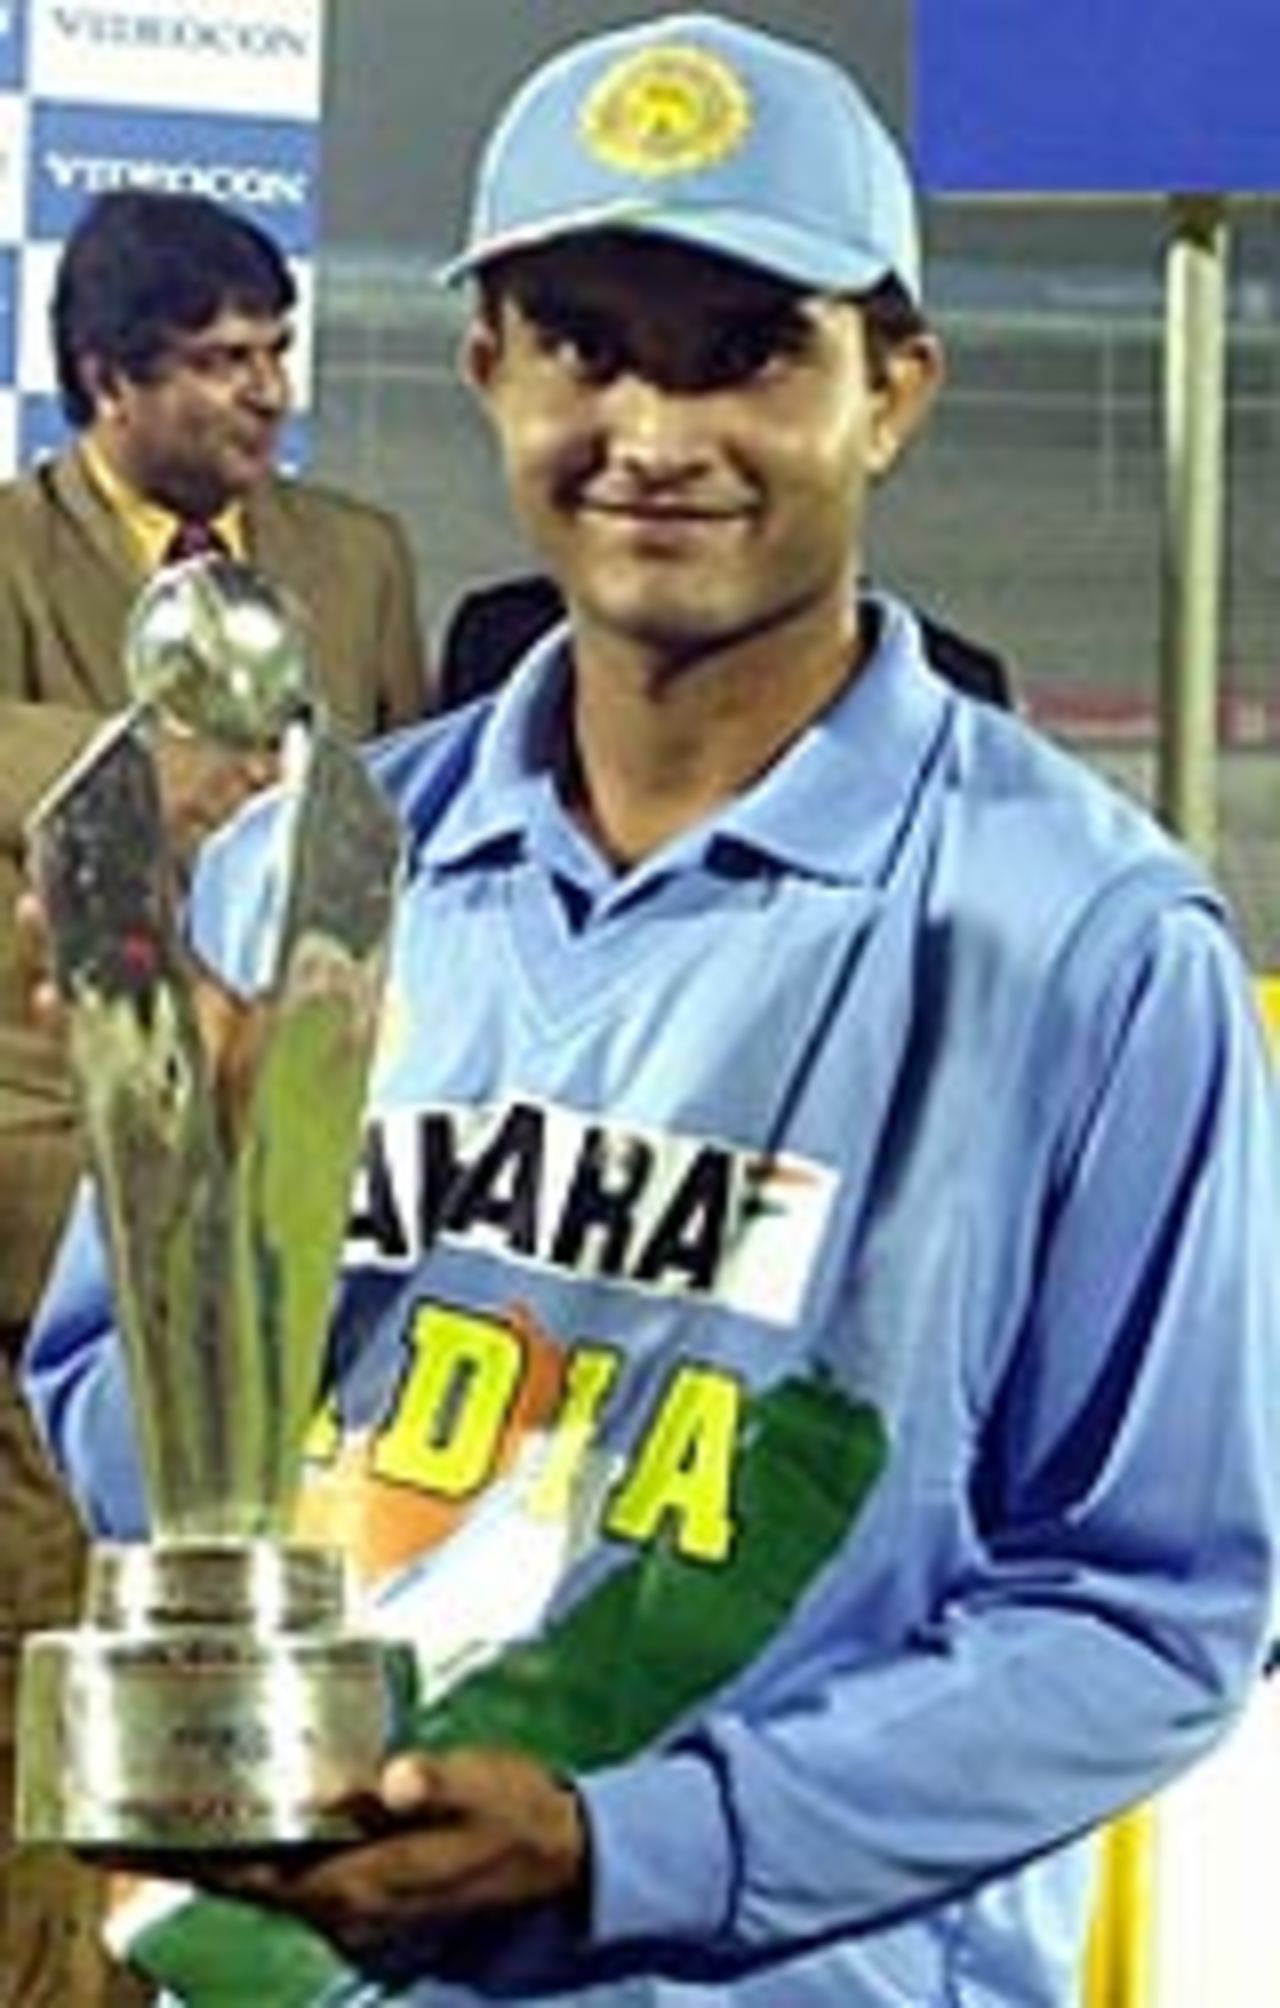 Sourav Ganguly with the trophy after winning the series, Bangladesh v India, 3rd ODI, Dhaka, December 27, 2004